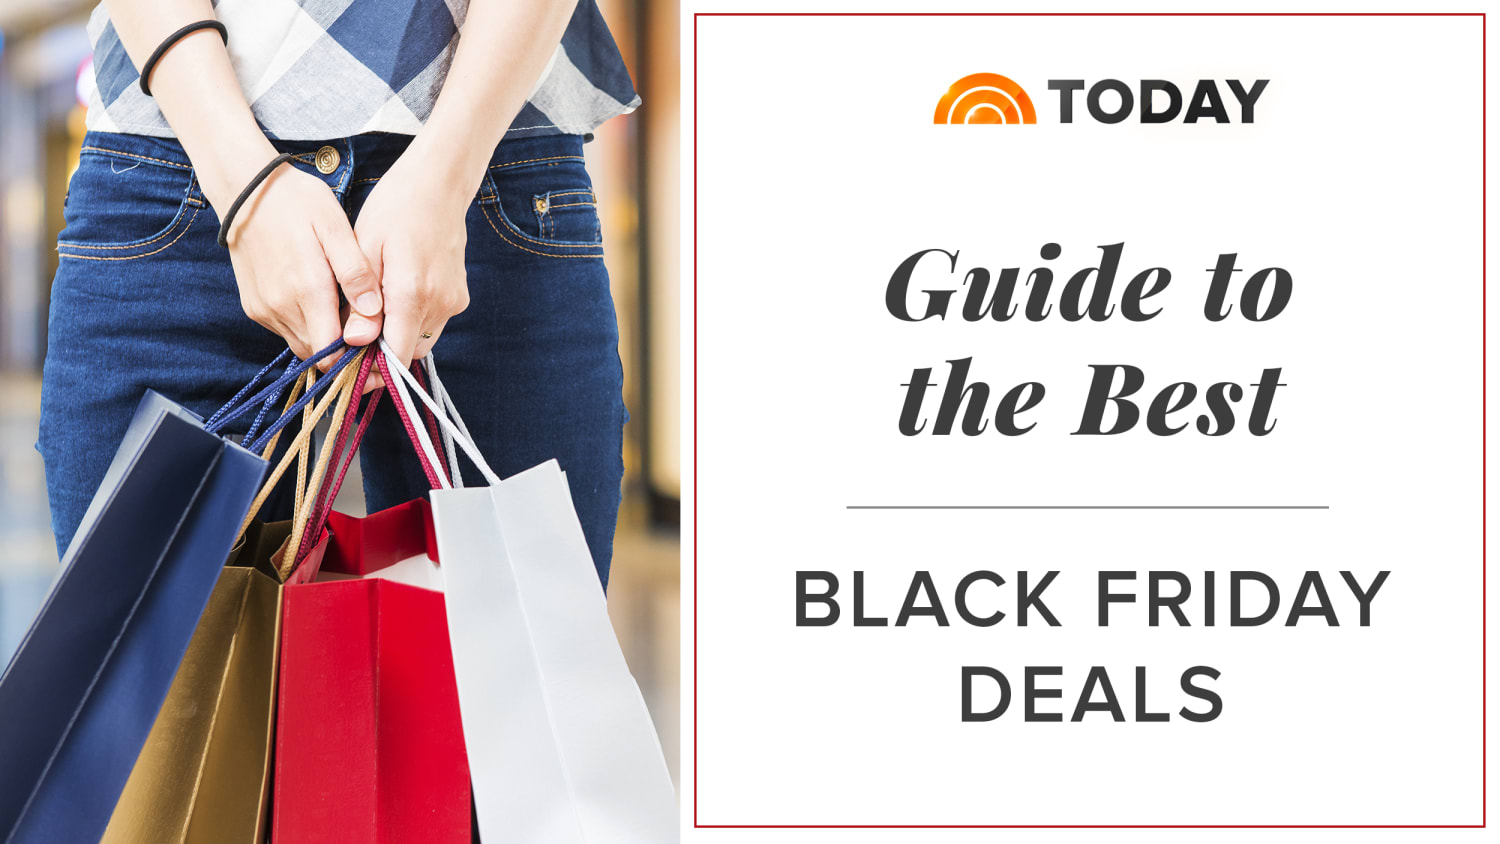 Best Black Friday Deals on Amazon, Target and more 2017 - TODAY.com - What Are The Black Friday Deals Today